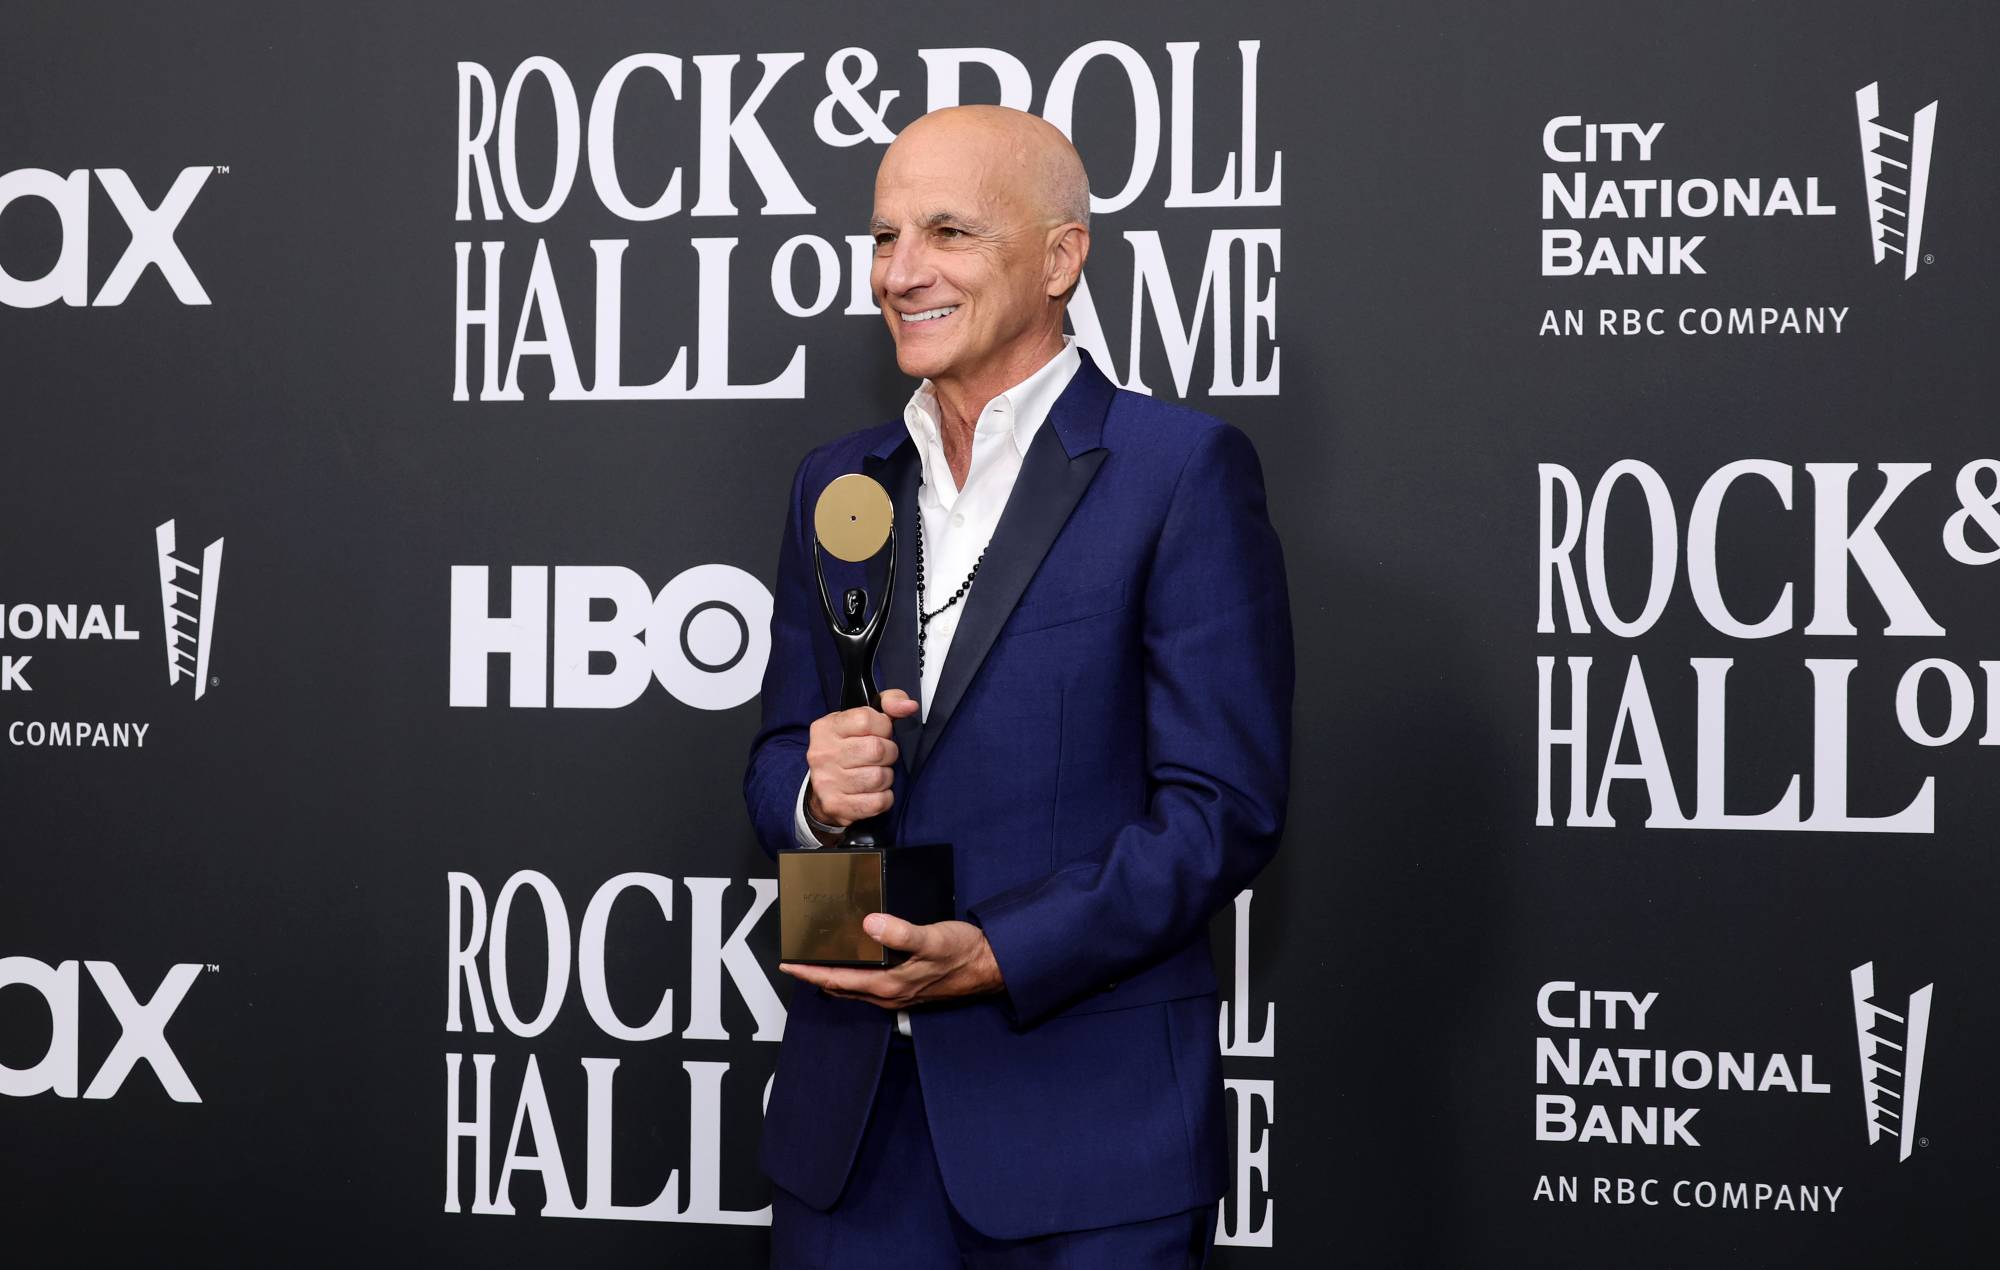 Inductee Jimmy Iovine poses in the press room during the 37th Annual Rock & Roll Hall of Fame Induction Ceremony at Microsoft Theater on November 05, 2022 in Los Angeles, California. (Photo by Emma McIntyre/Getty Images for The Rock and Roll Hall of Fame)